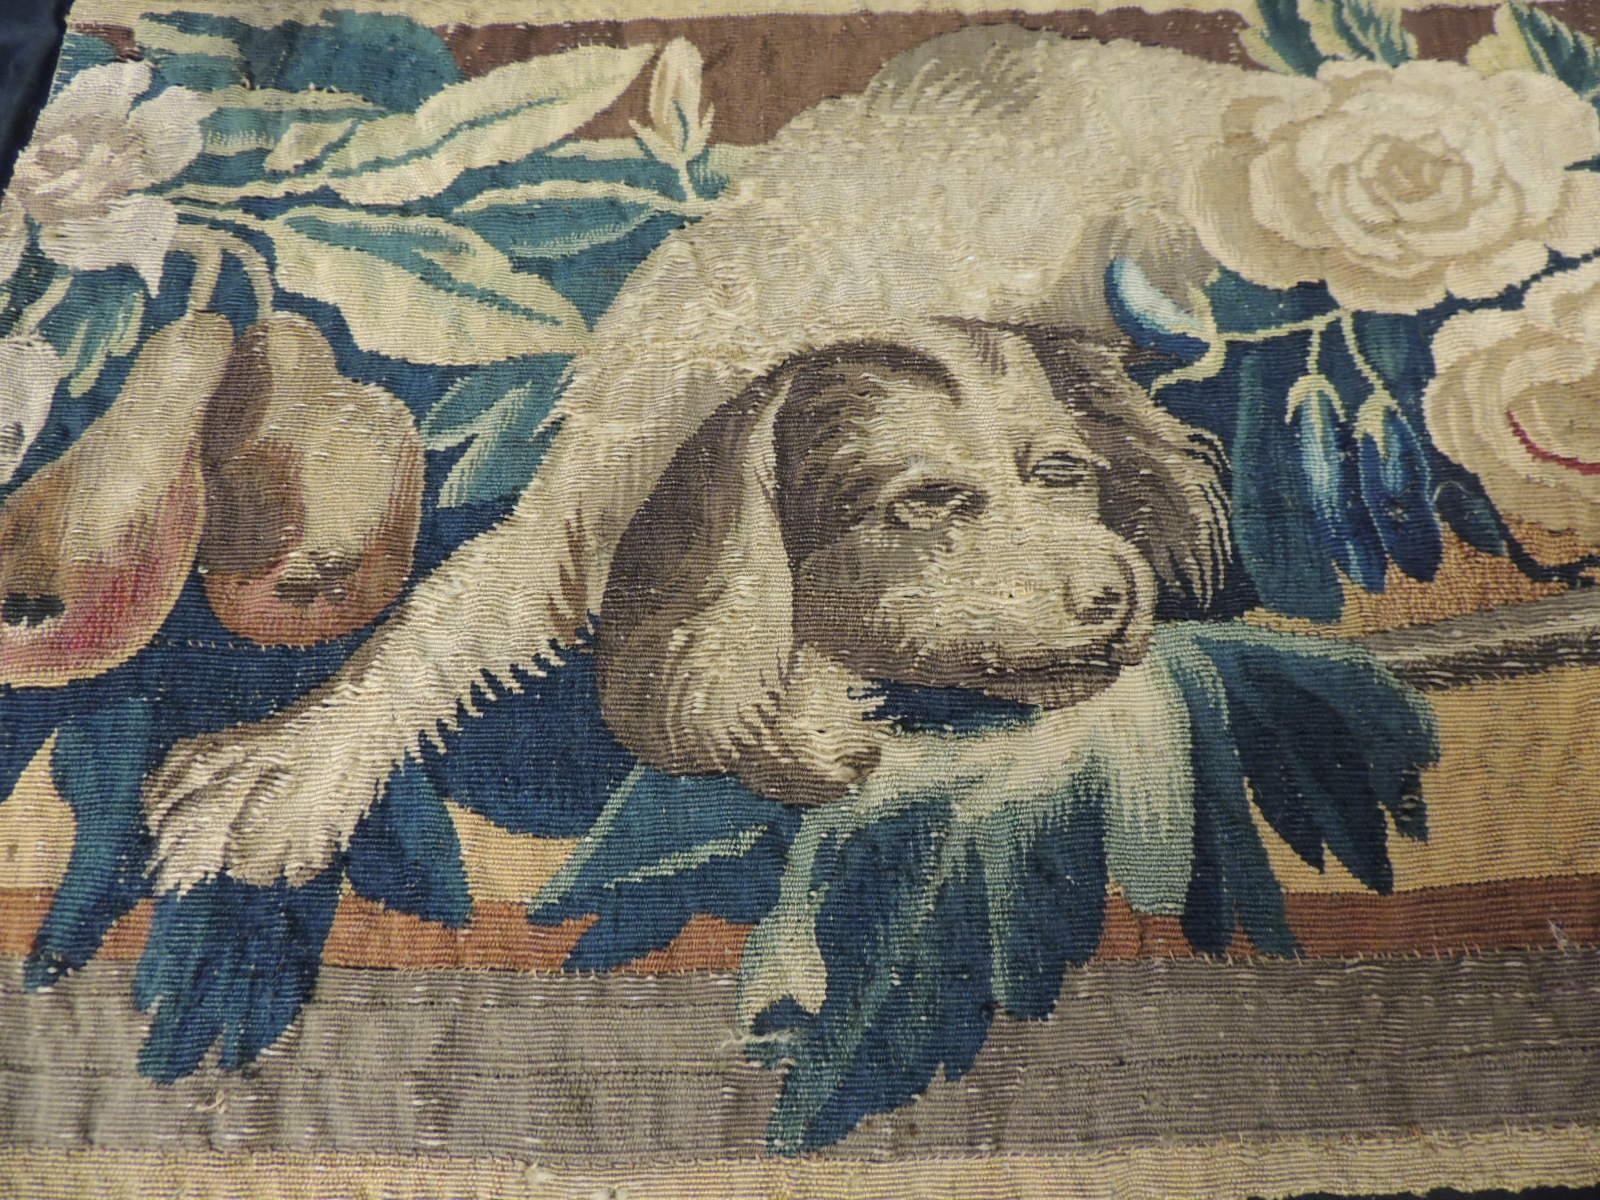 18Th Century Aubusson Tapestry Depicting Dog Fragment.
Tapestry panel depicting Spaniel dog surrounded by green leaves, arms, flowers and fruits.
Sold as is. (Last image shows some restoration done)
Size: 13